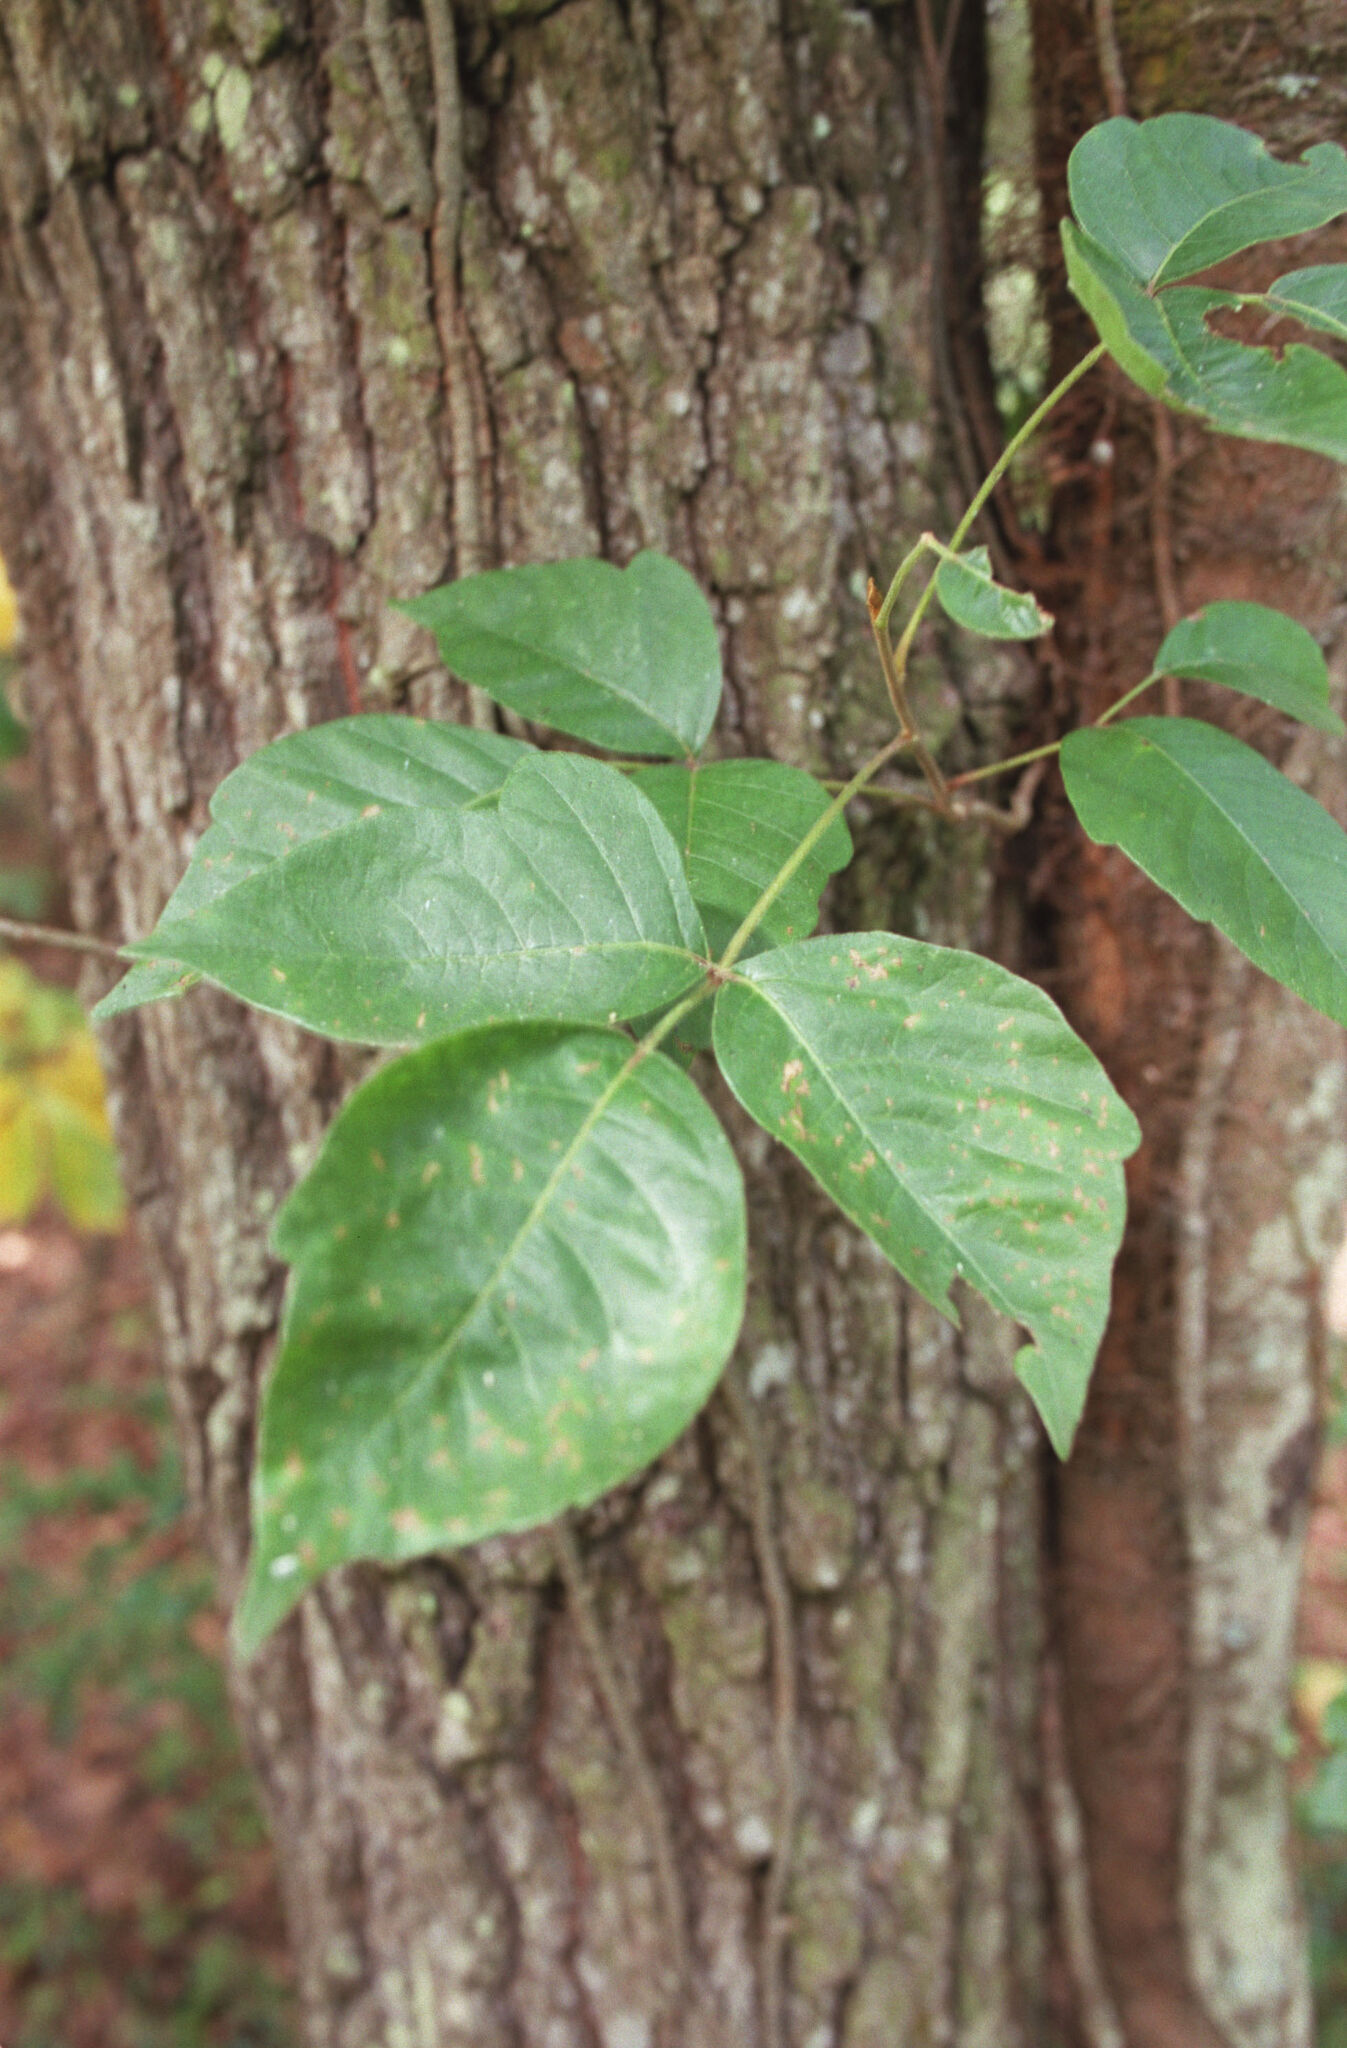 Yes, you are seeing more poison ivy in CT